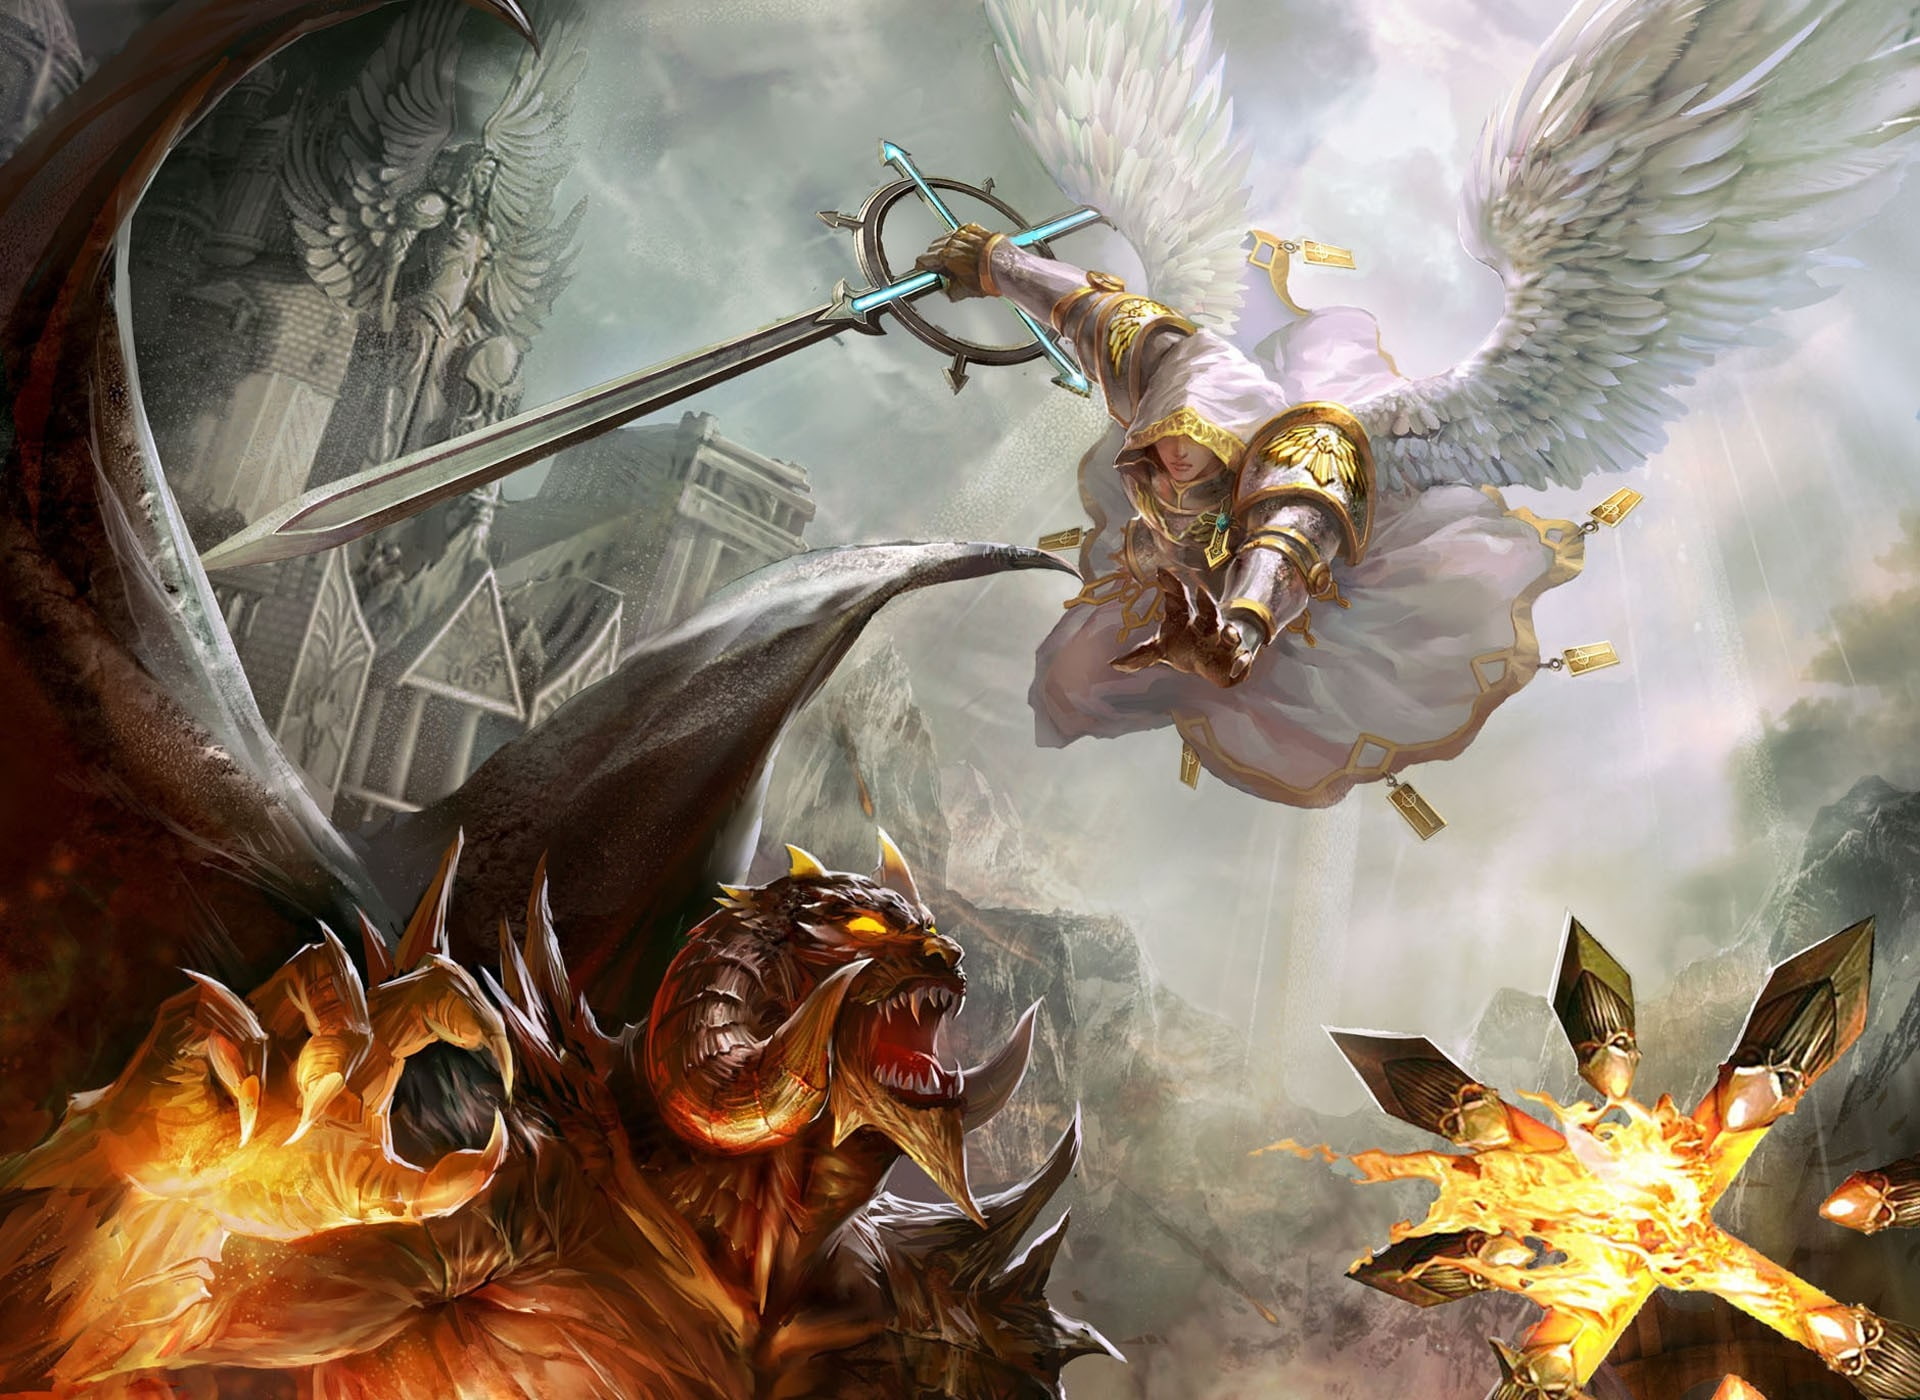 angels video games wings fire demons fight evil weapons devil battles heroes of might and magic artw Art artwork HD Art